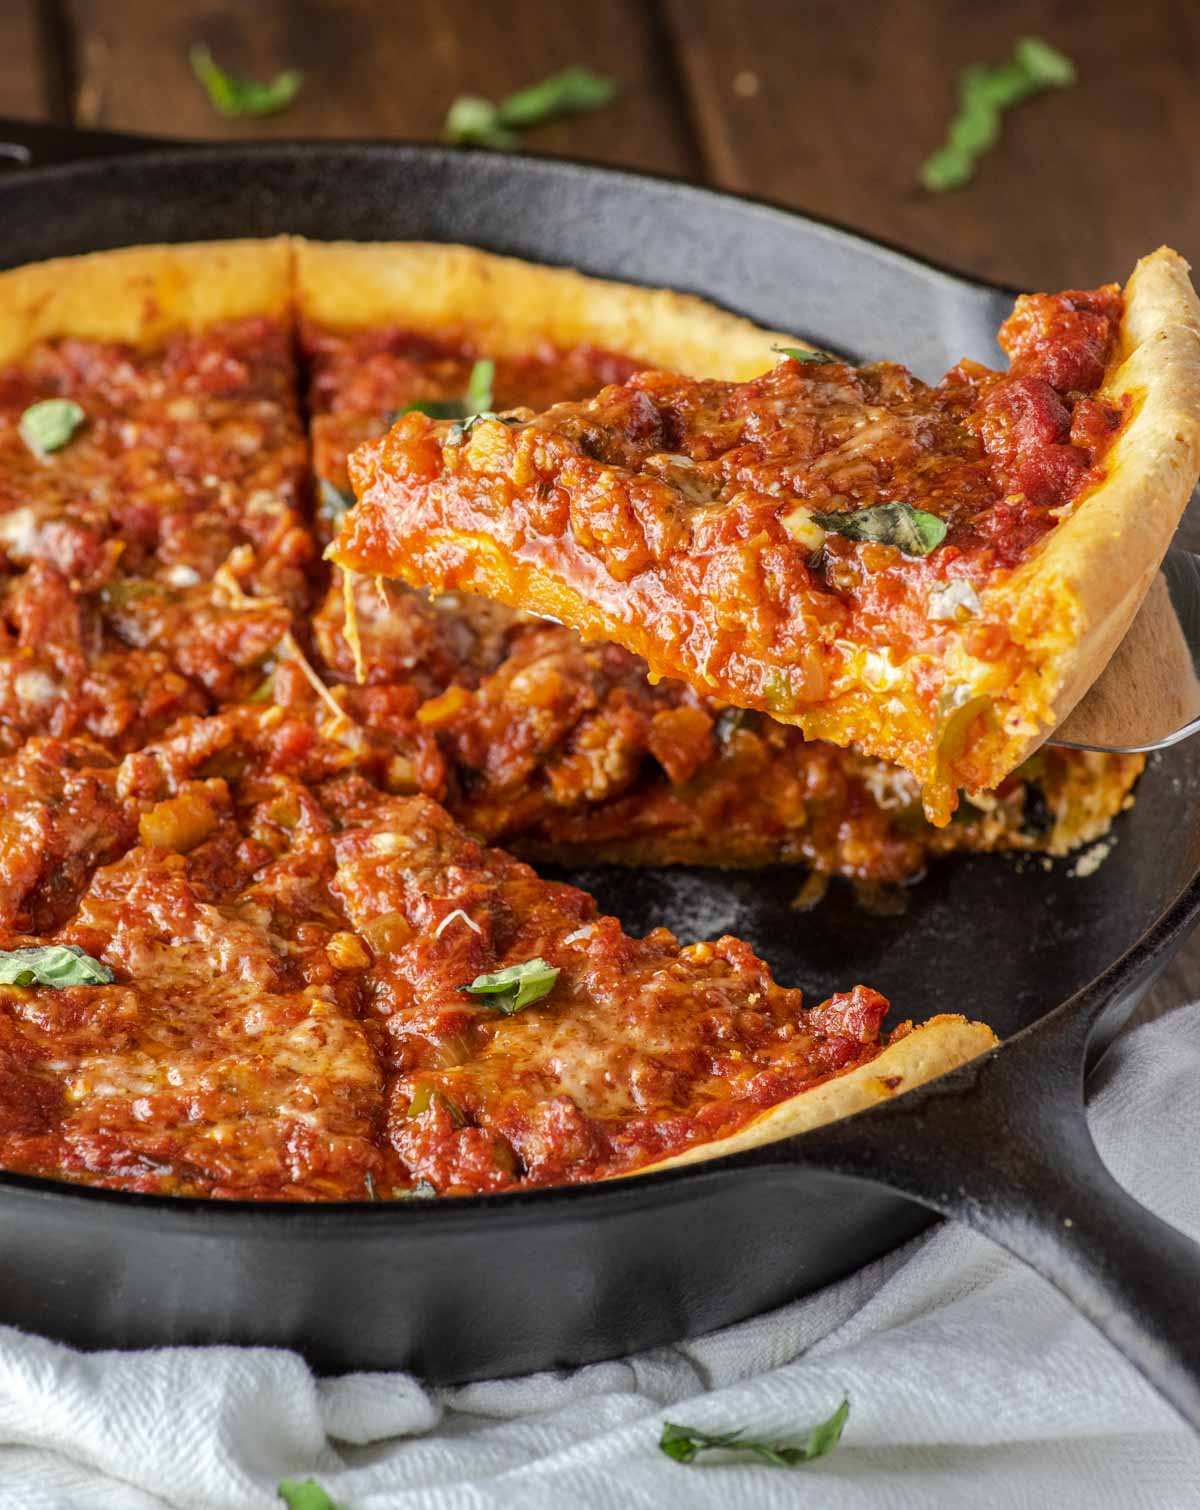 ChicagoStyle Deep Dish Pizza Recipe Chisel & Fork